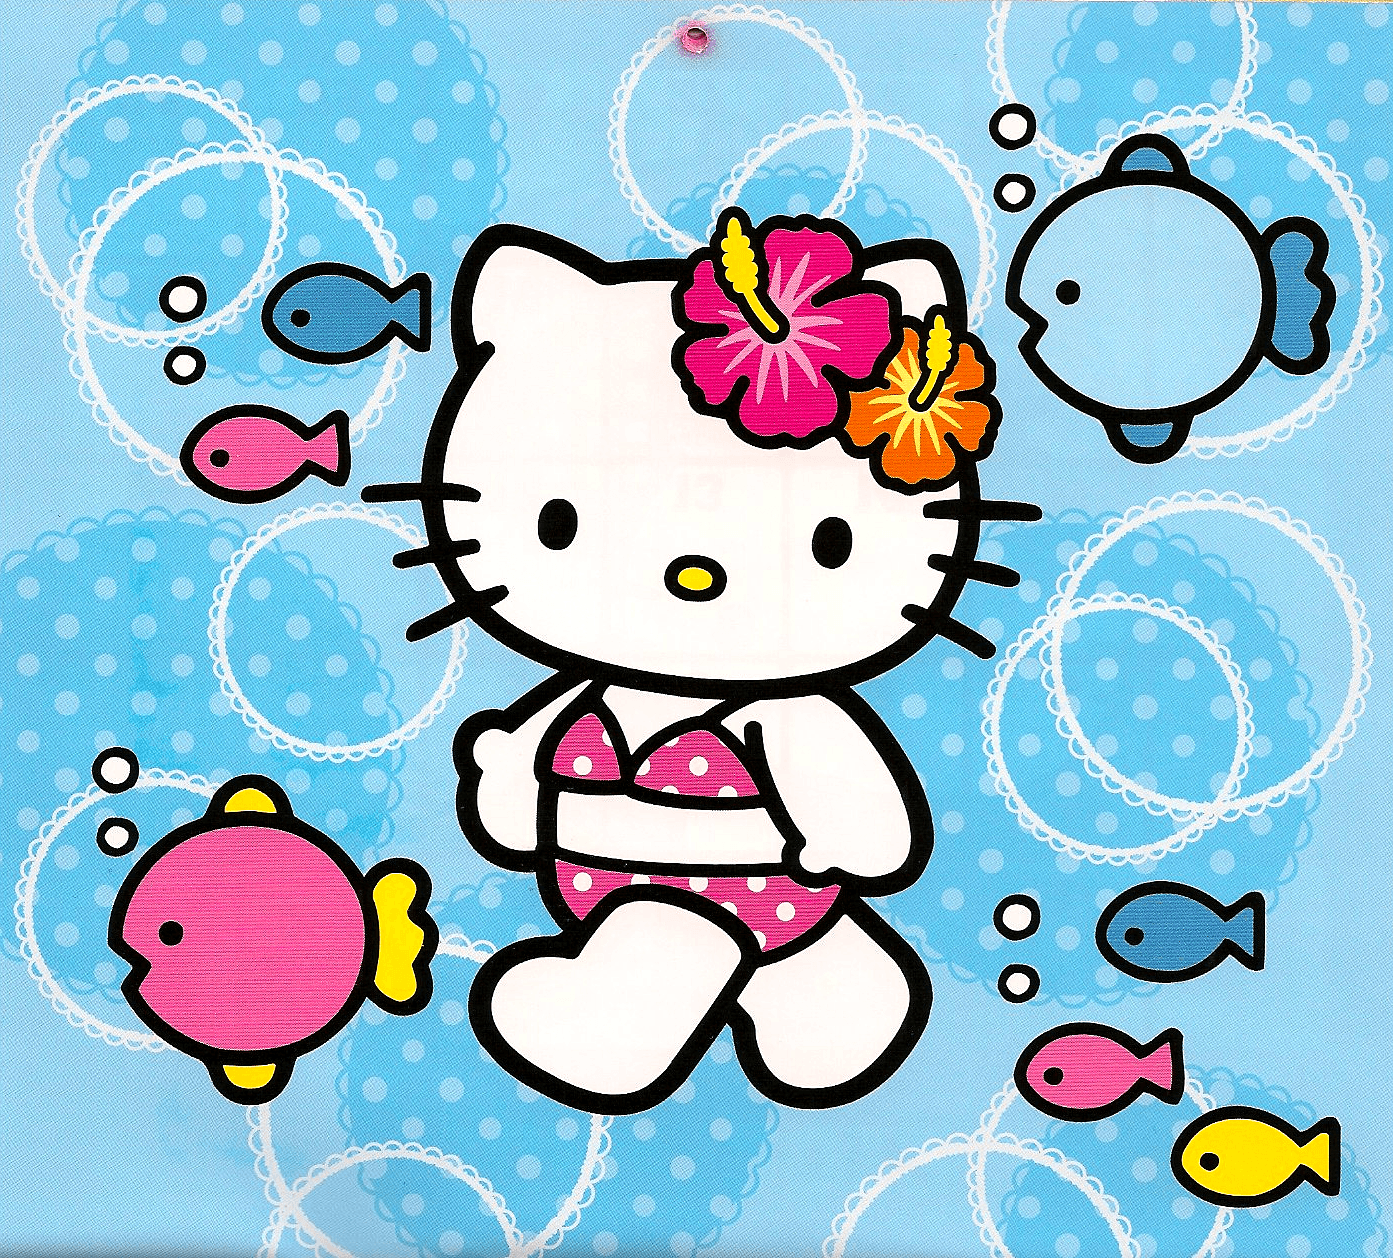 Hello Kitty Wallpapers 2017 - Wallpaper Cave